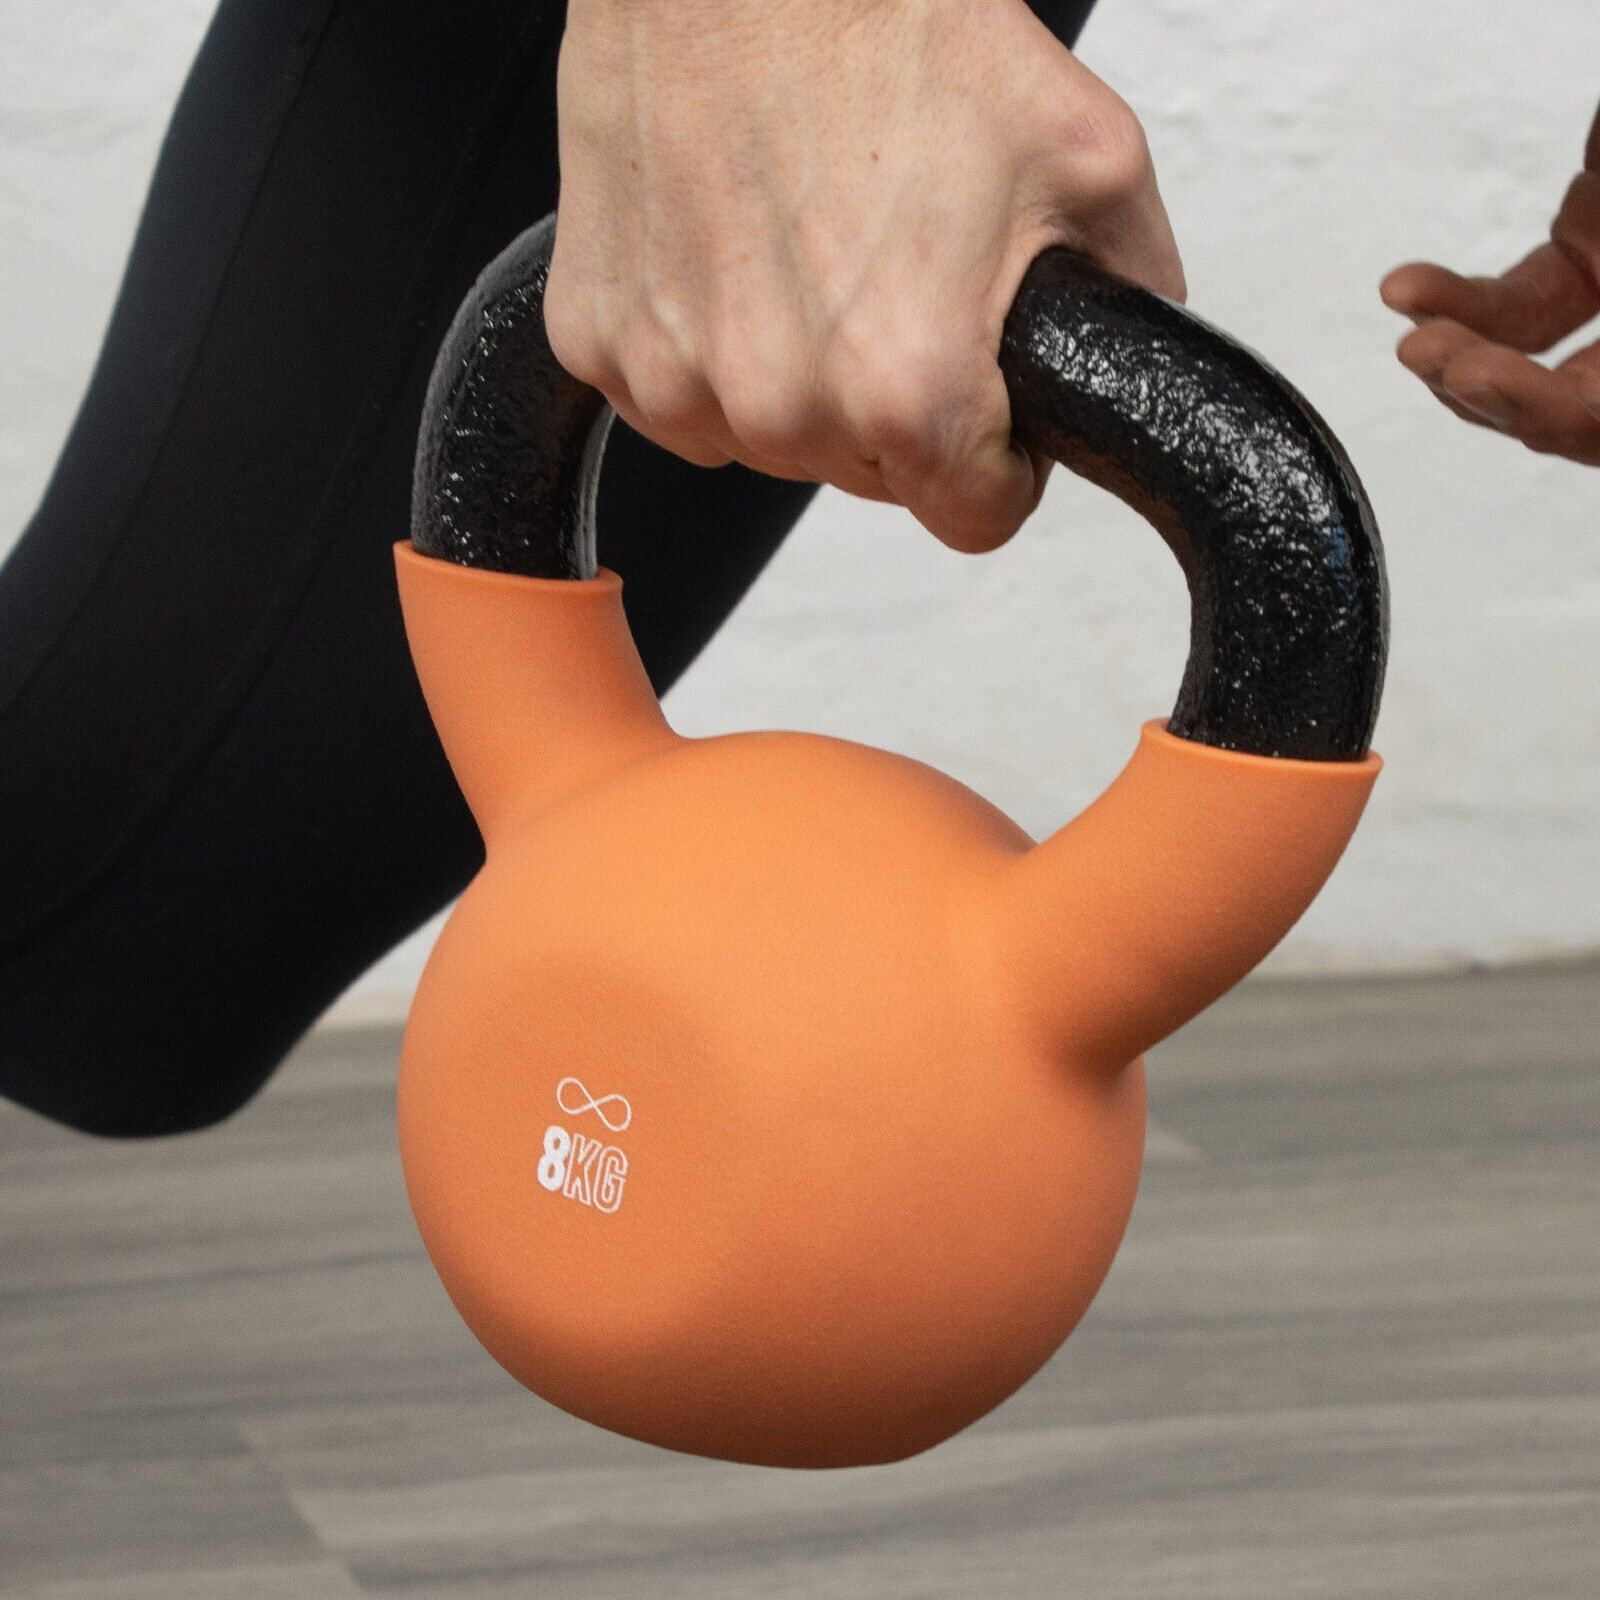 Exercise With Kettlebell